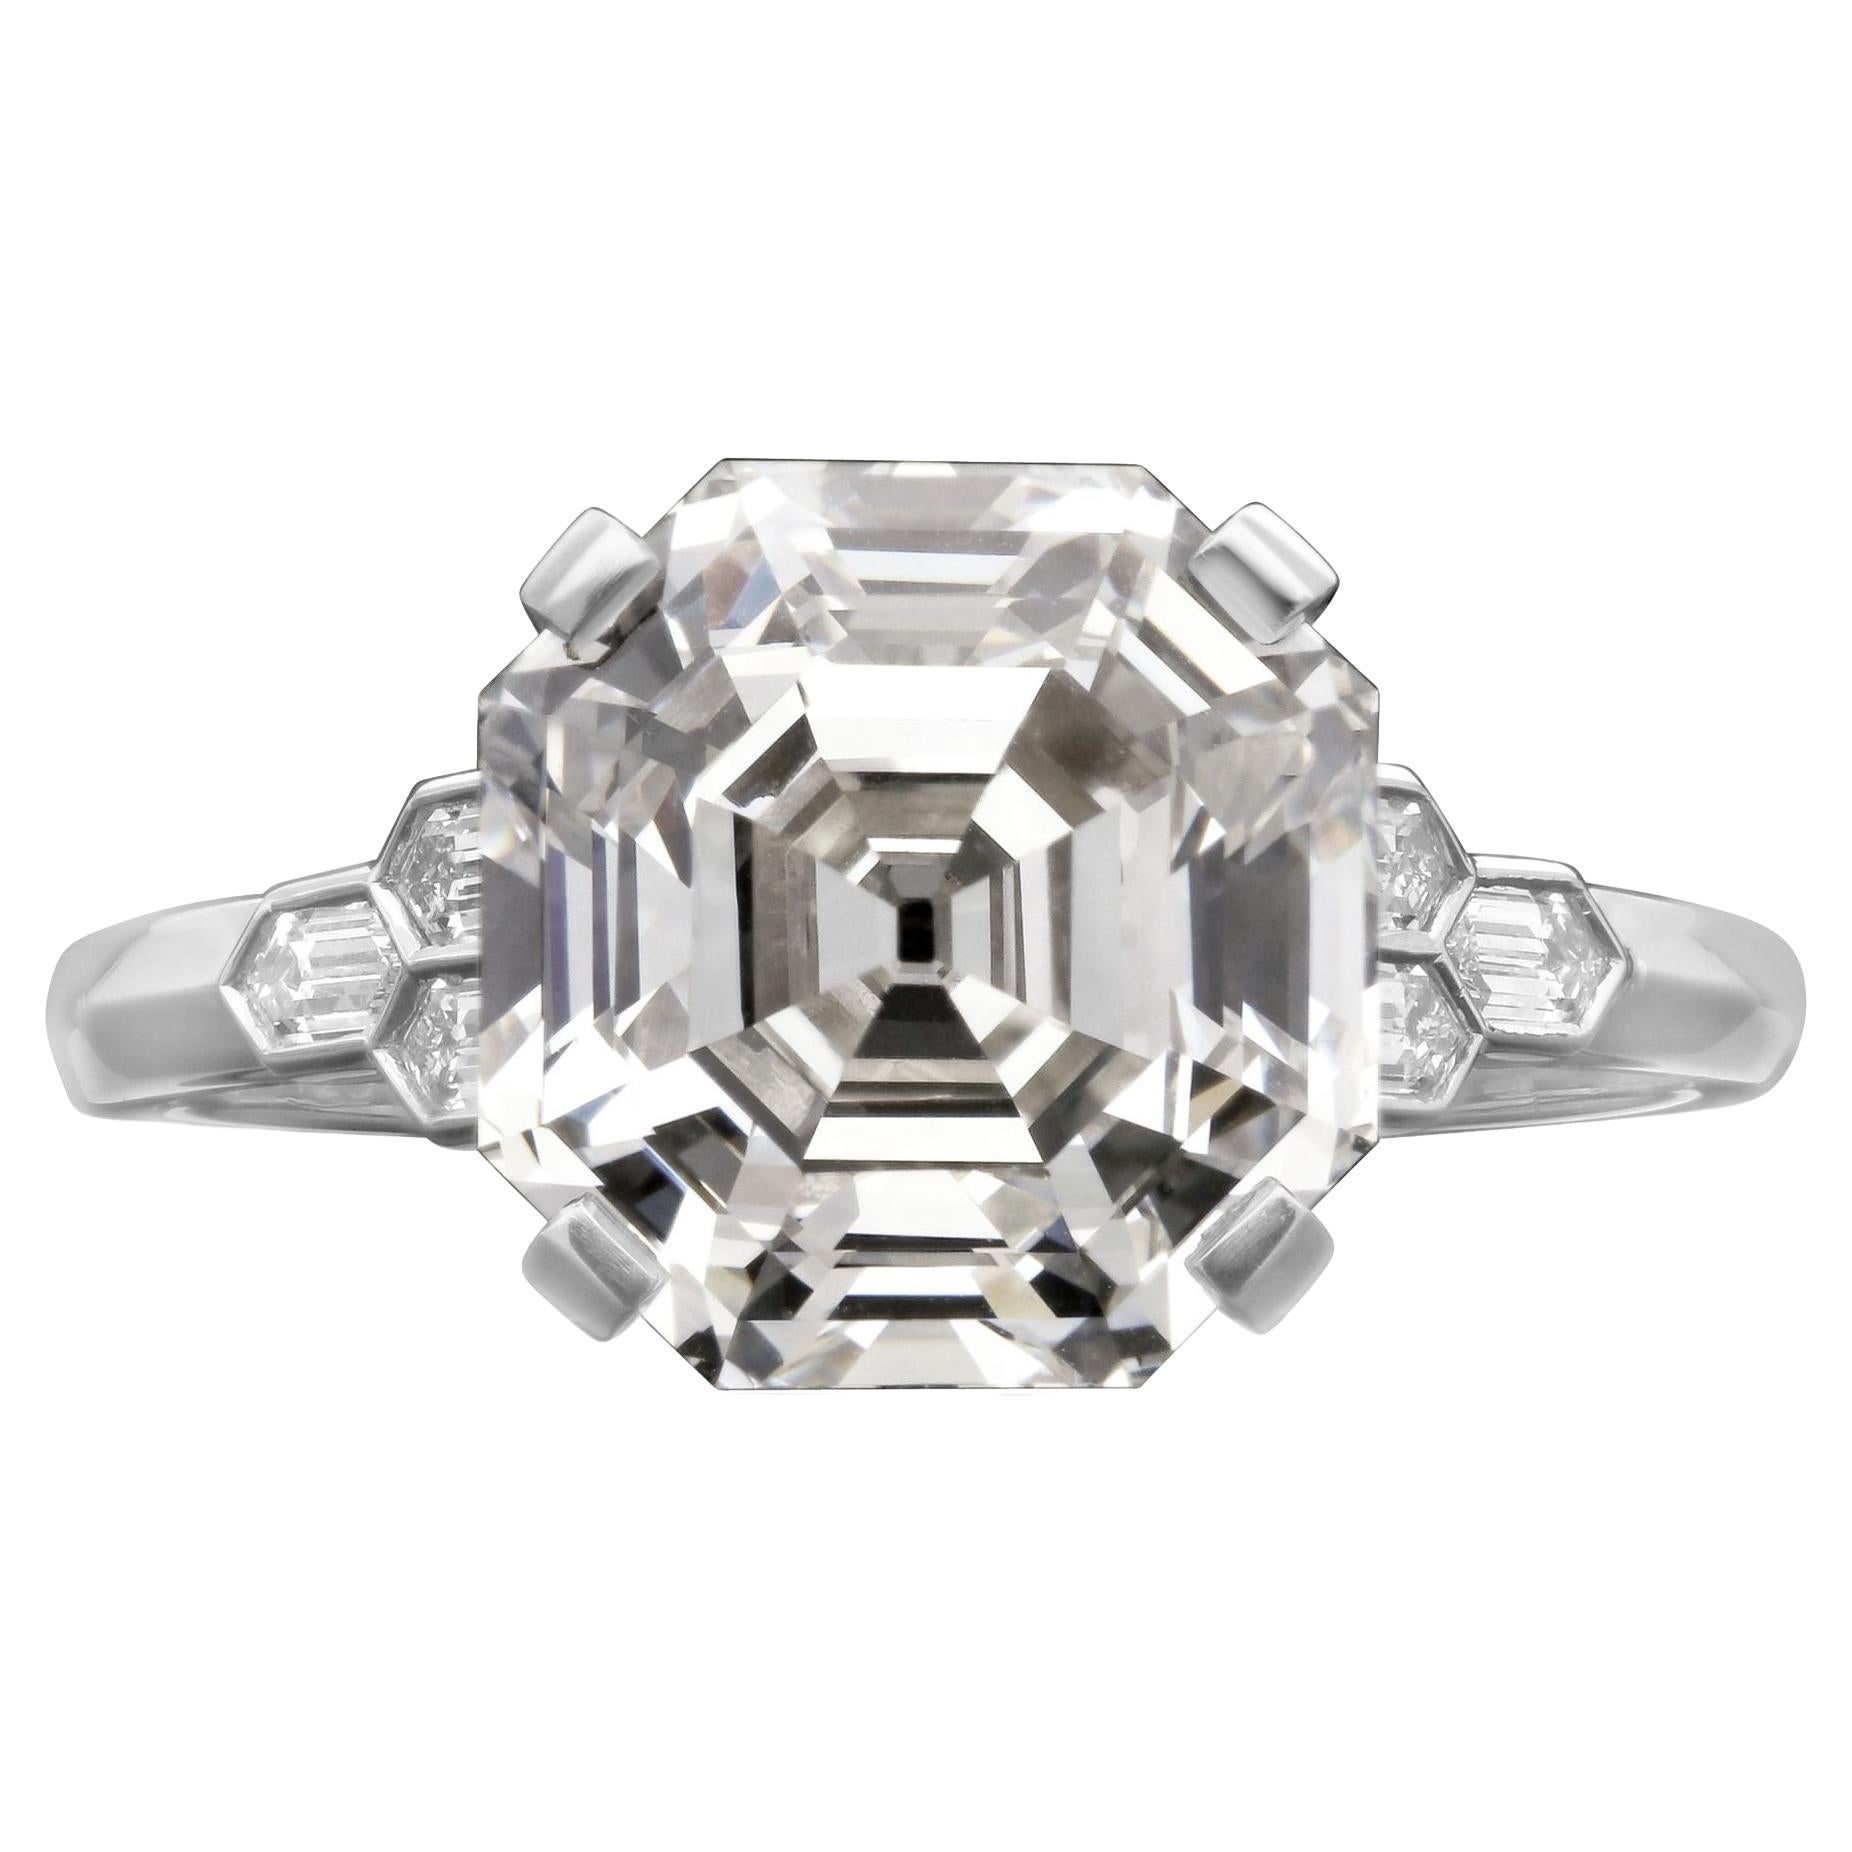 Hancocks 5.14ct Asscher Cut Diamond Ring With Honeycomb Shoulders Contemporary For Sale